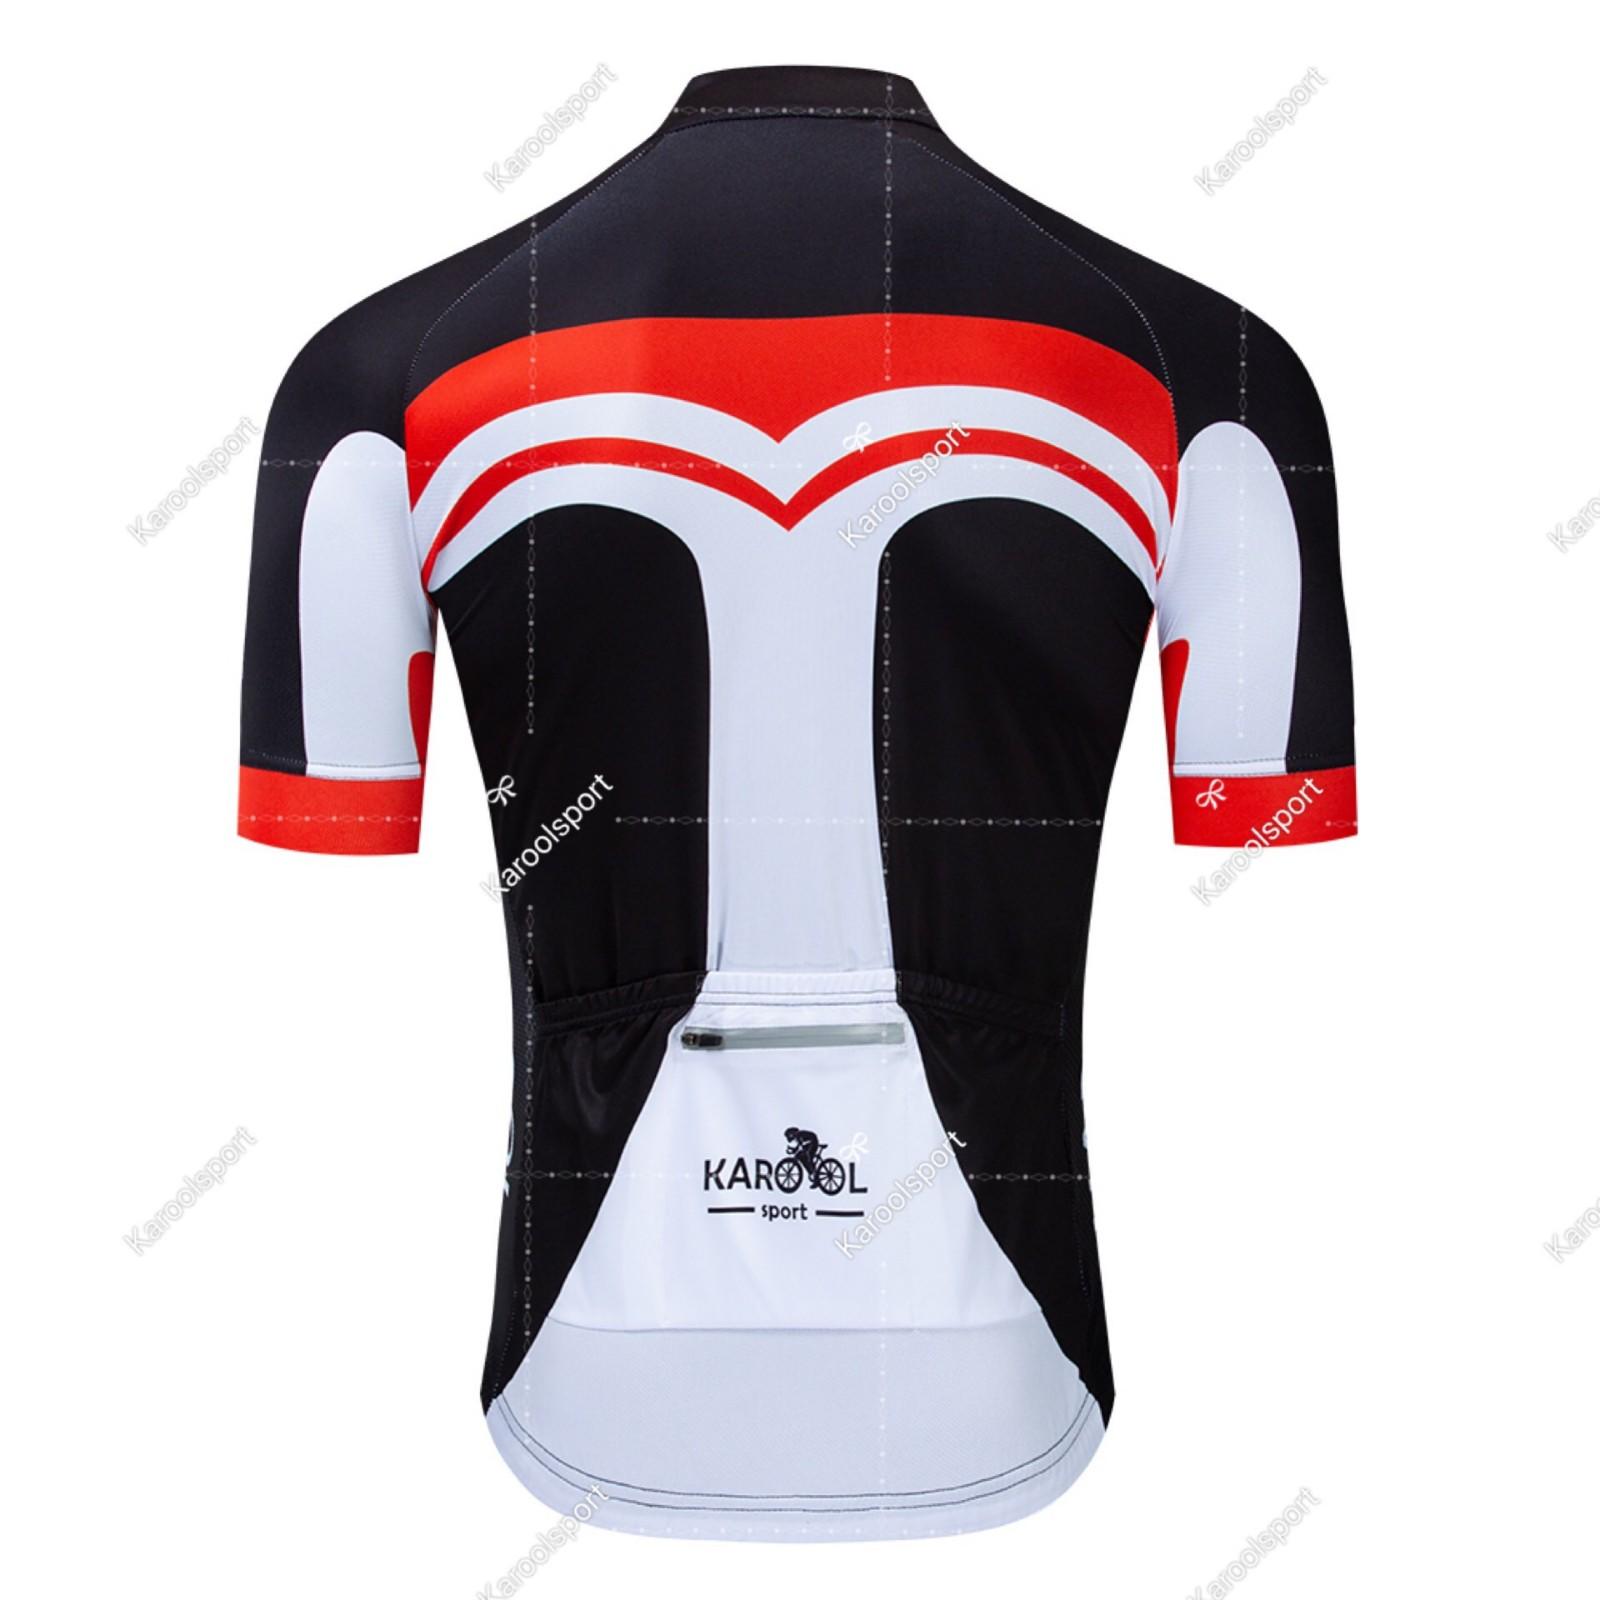 Karool breathable cool cycling jerseys with good price for children-3